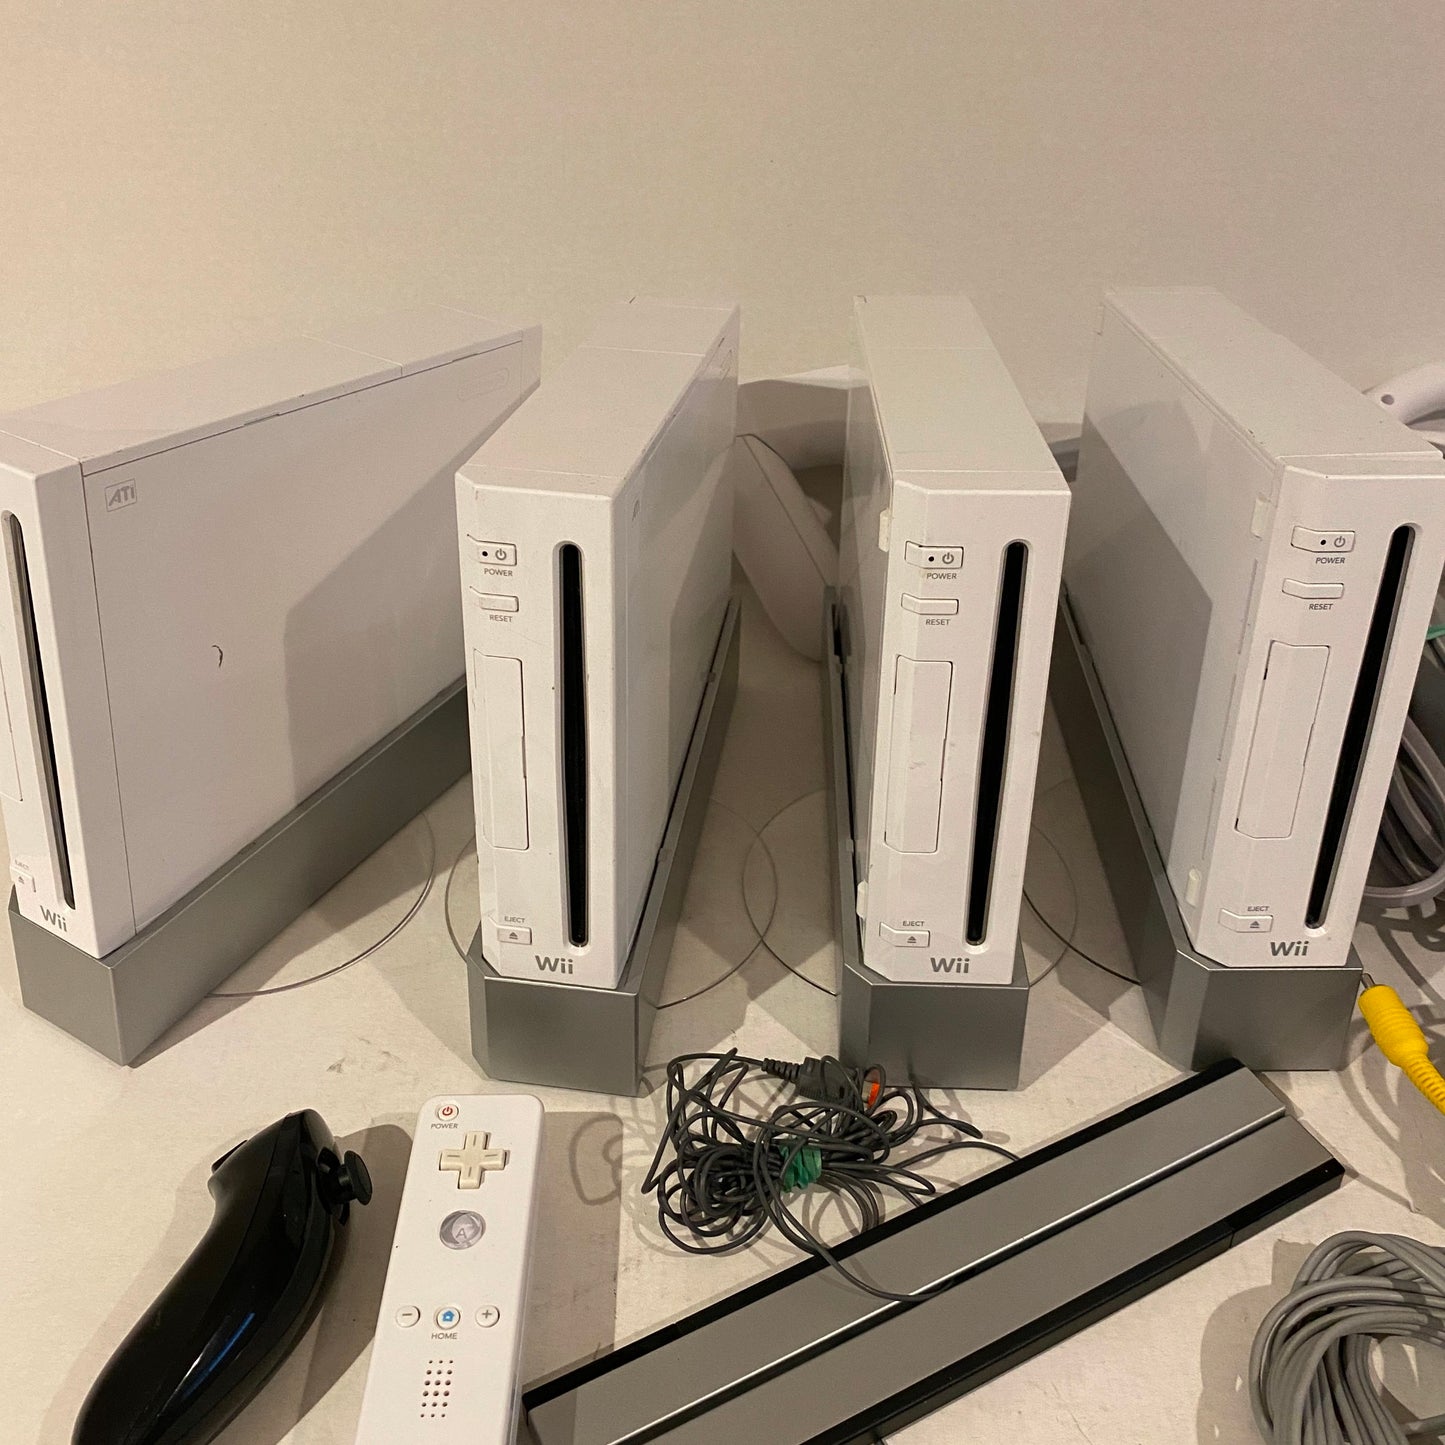 Nintento Wii - Working - Lot of 4, power supplies, A/V cables, accessories